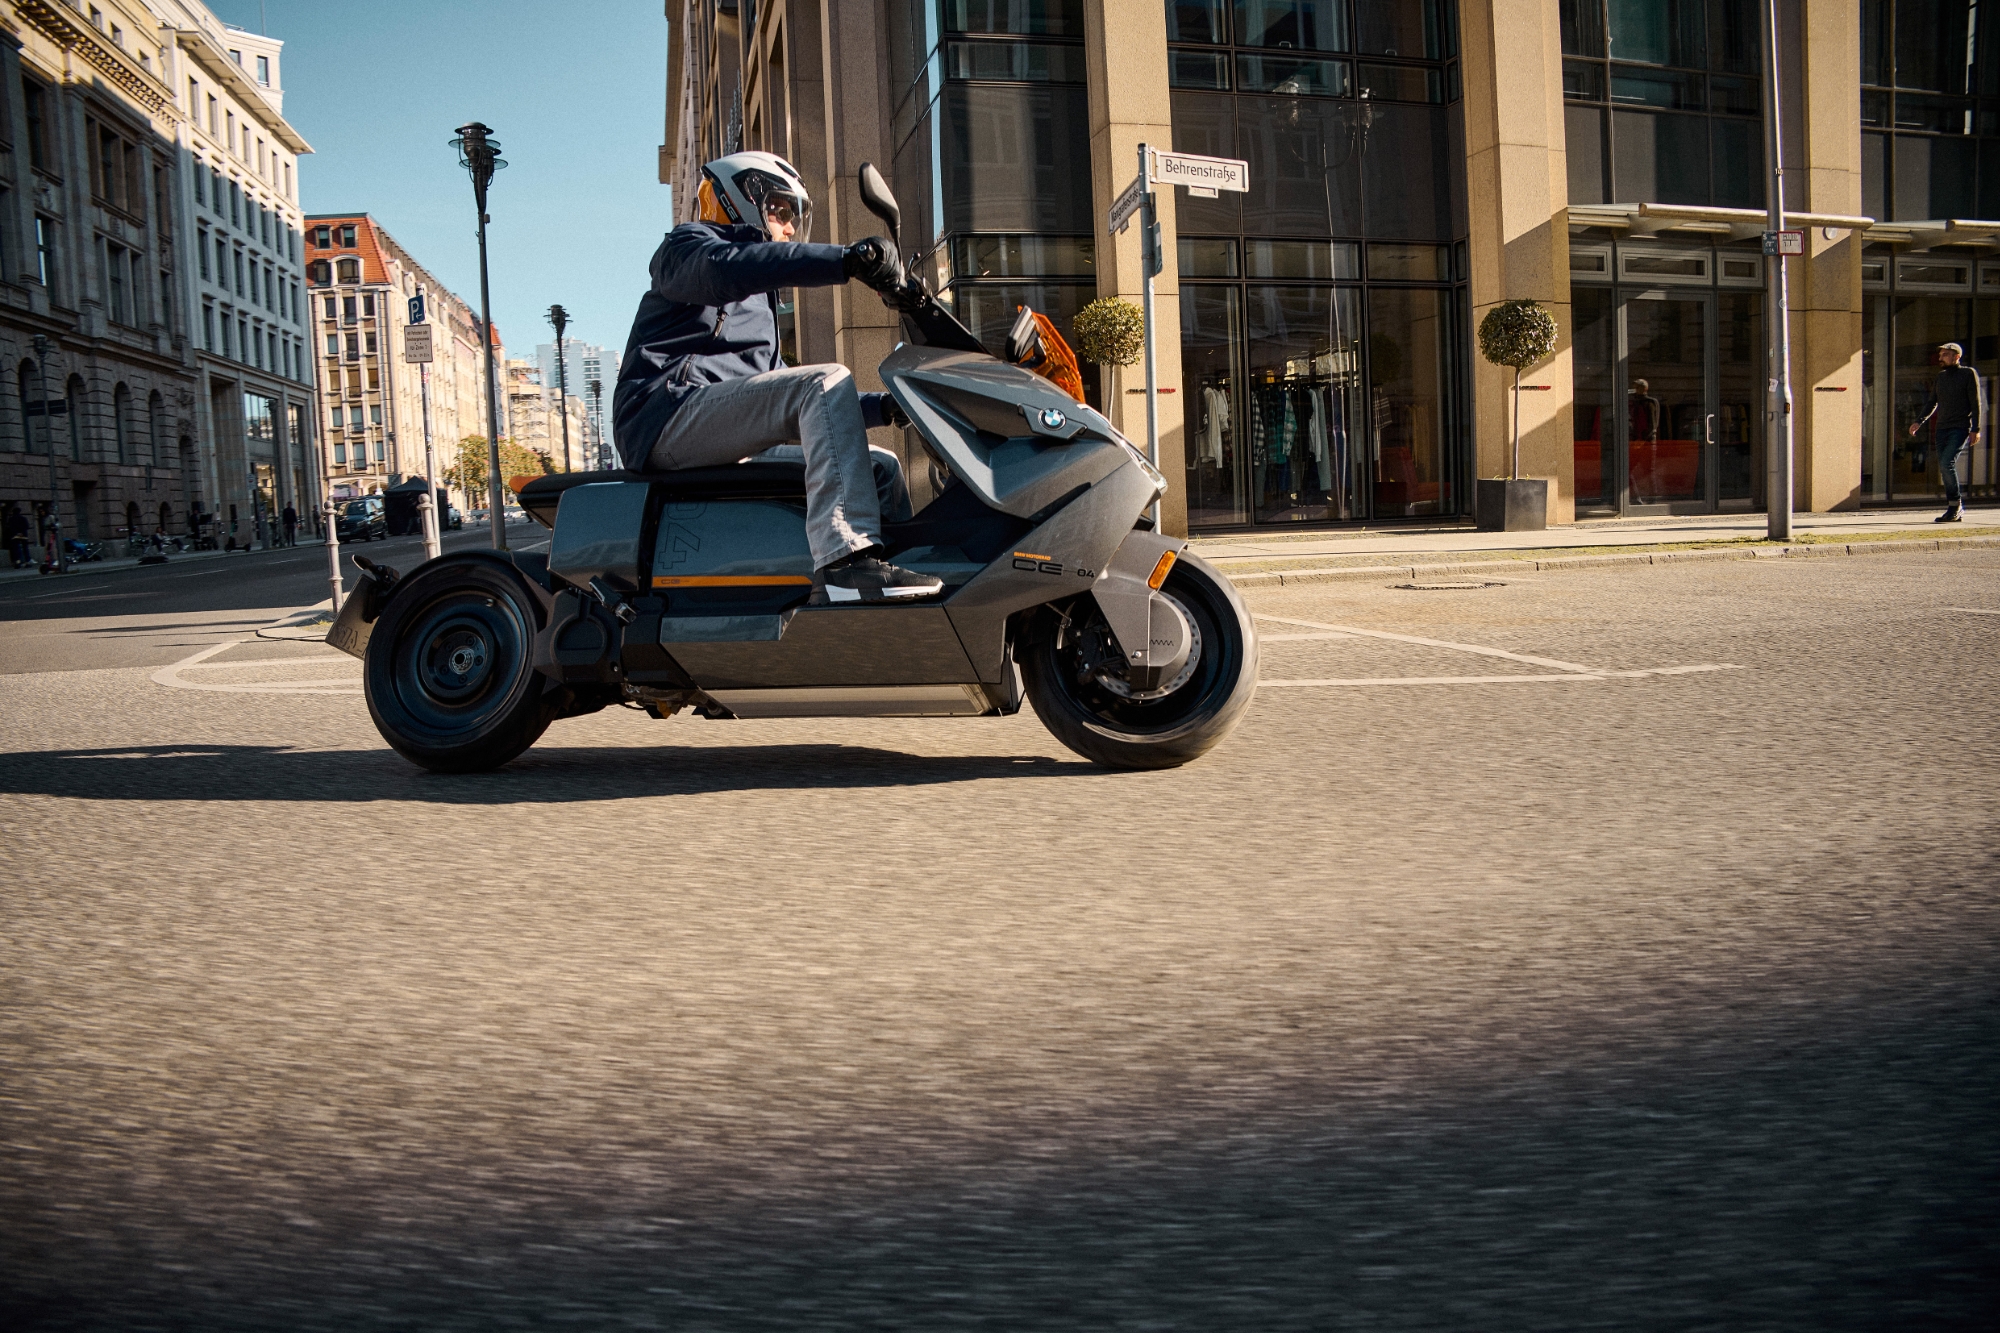 BMW launches mass production of Motorrad CE 04 electric scooter with 130 km range and acceleration to 50 km/h in 2.6 sec